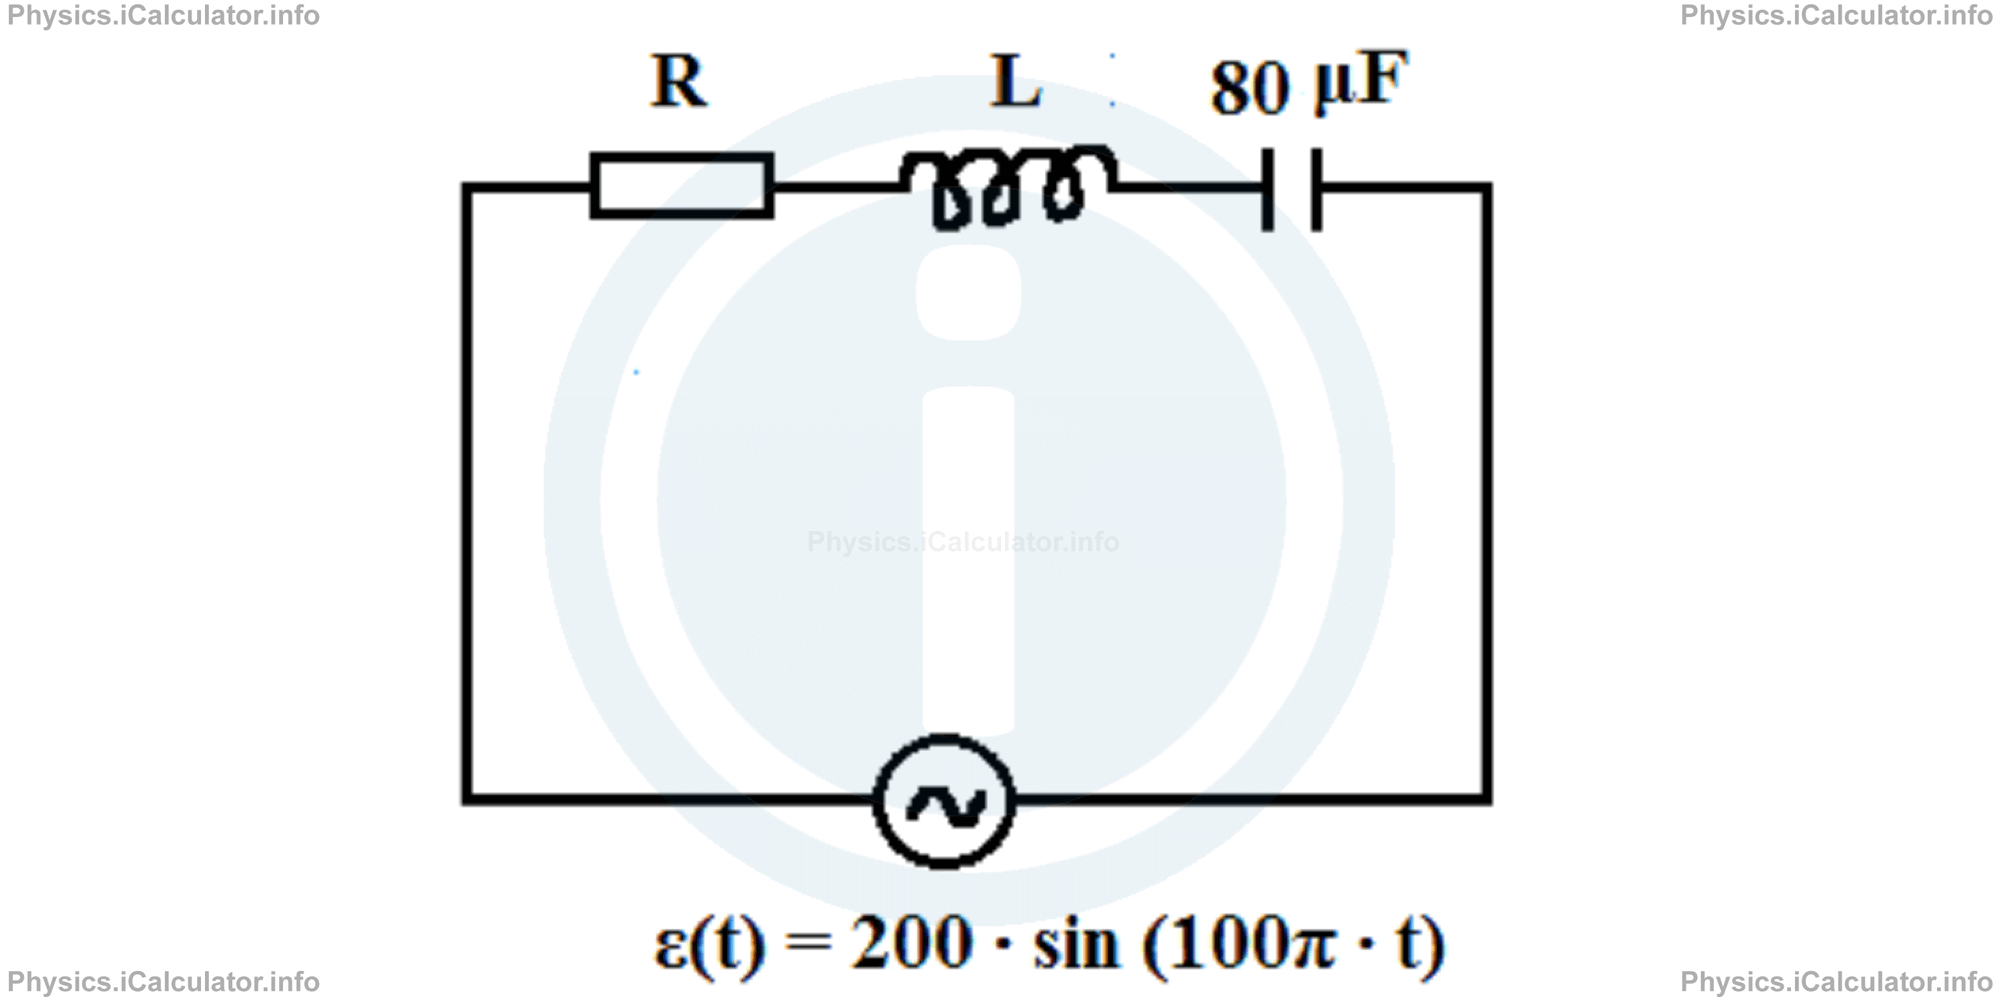 Physics Tutorials: This image provides visual information for the physics tutorial The Series RLC Circuit 